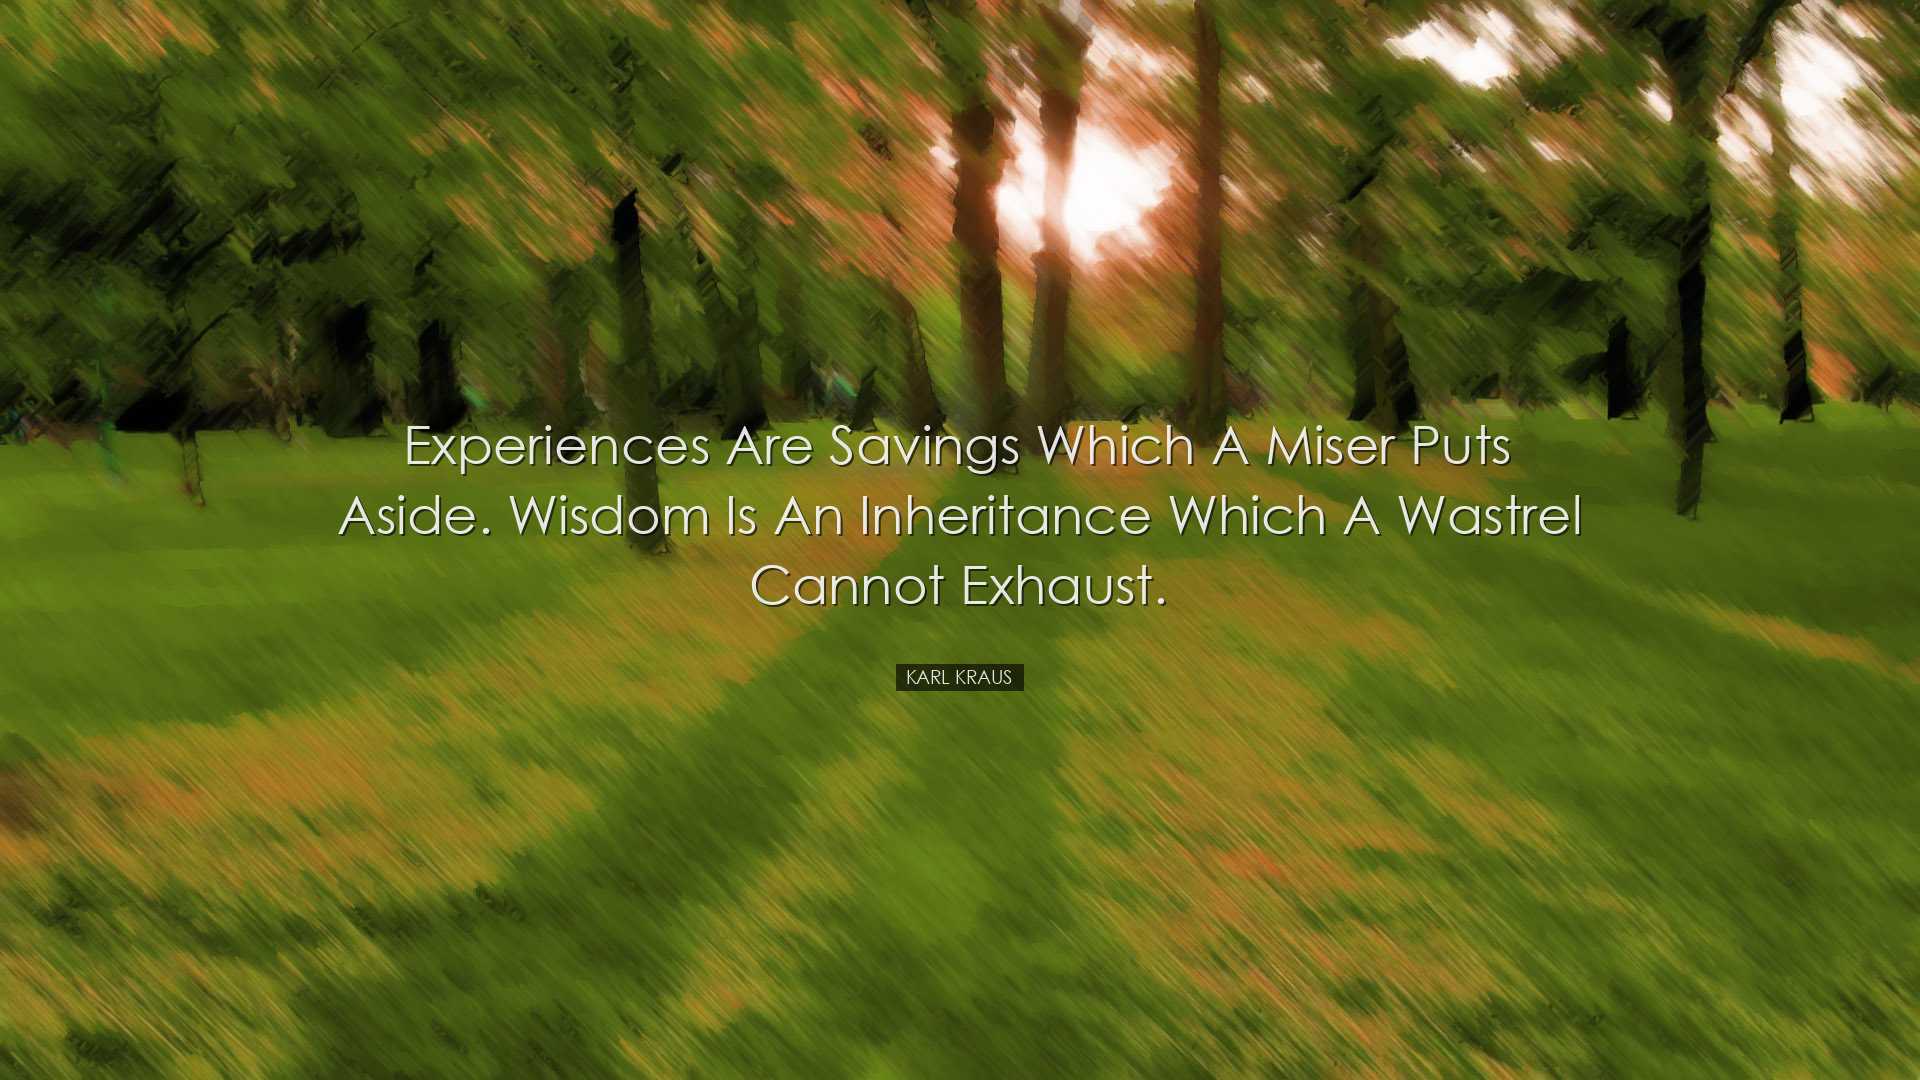 Experiences are savings which a miser puts aside. Wisdom is an inh